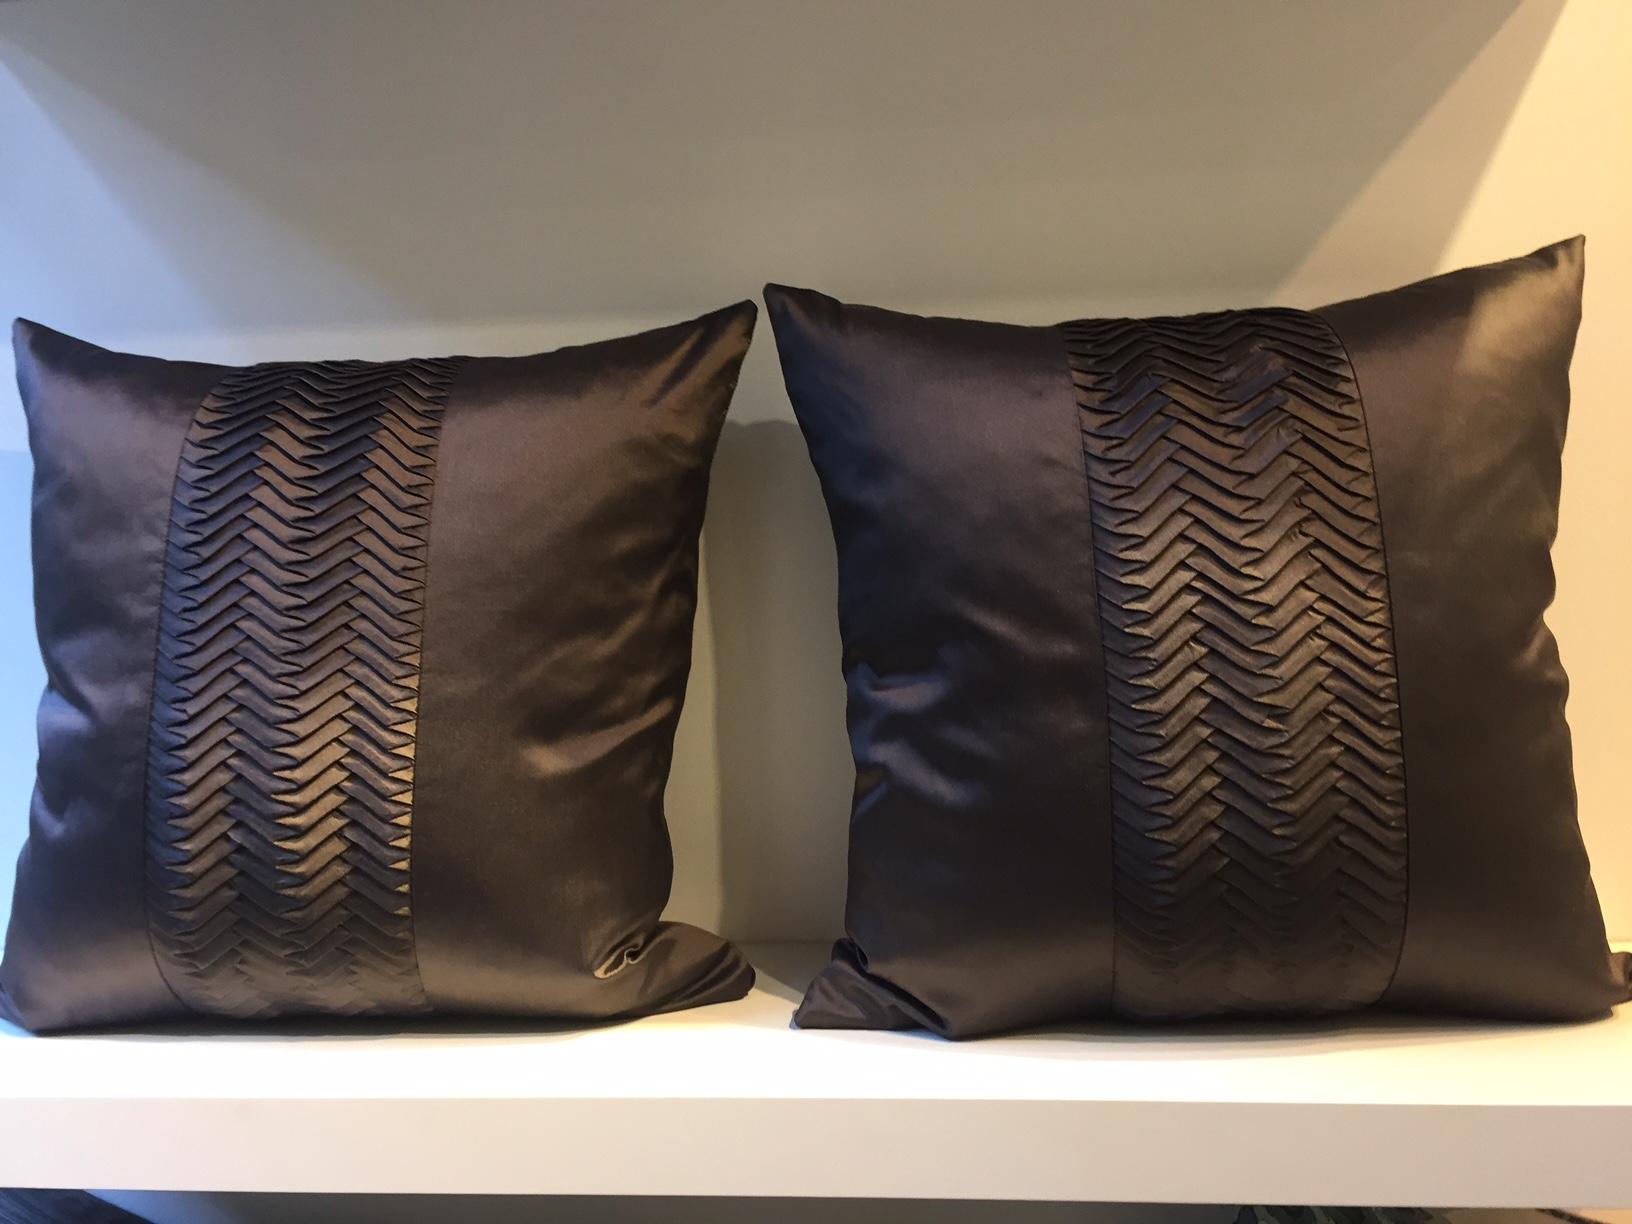 One pair of silk cushions color dark brown with pleated band detail on the front panel, front and back panel in silk taffeta hand woven, band detail silk taffeta embossed by steam pleating, back panel plain silk, cushion size 50 x 50cm, concealed